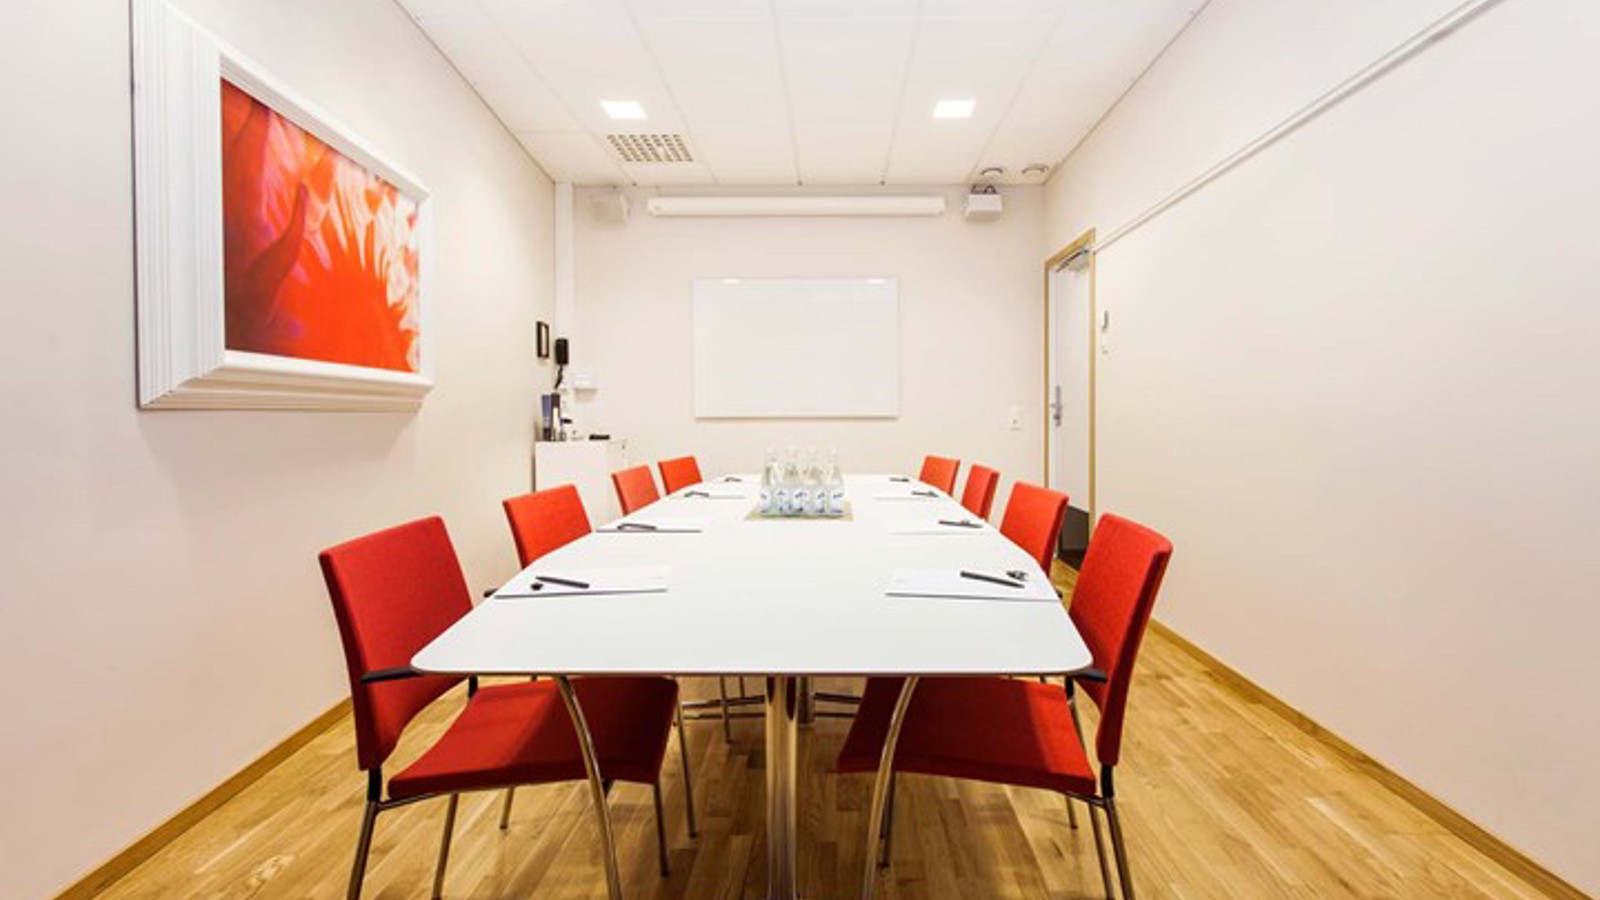 Board room with white table, red chairs and white walls